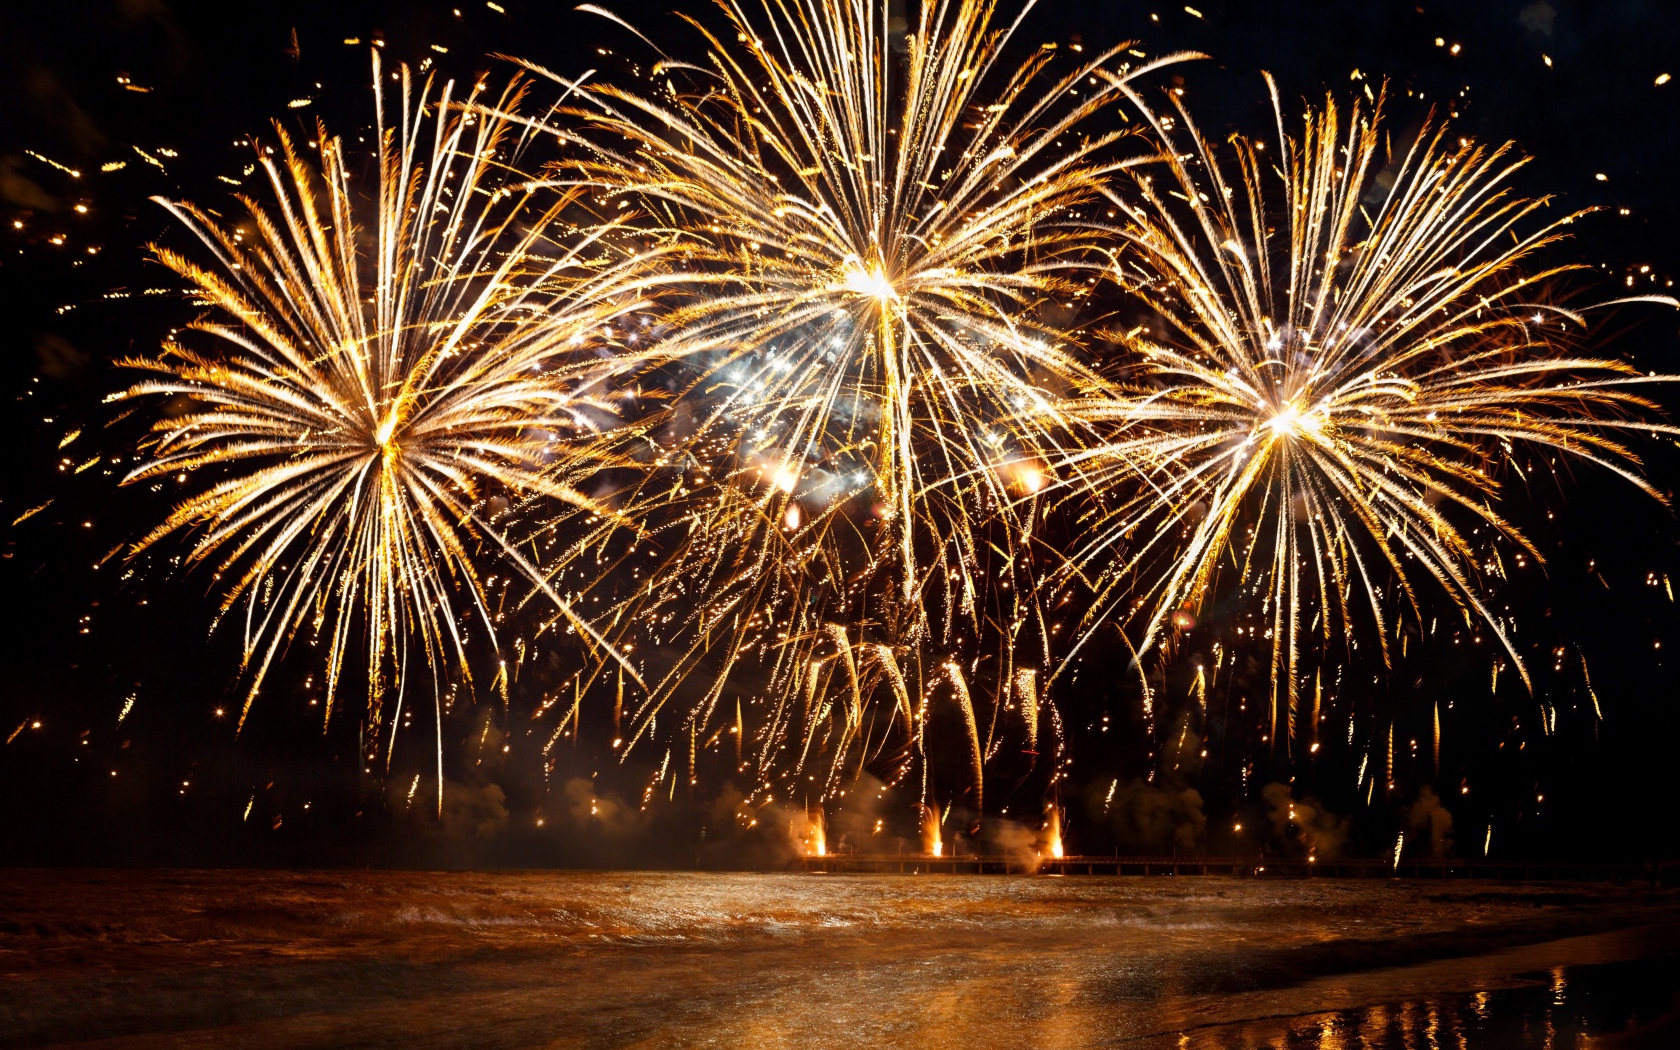 Bright flashes of New Year's fireworks